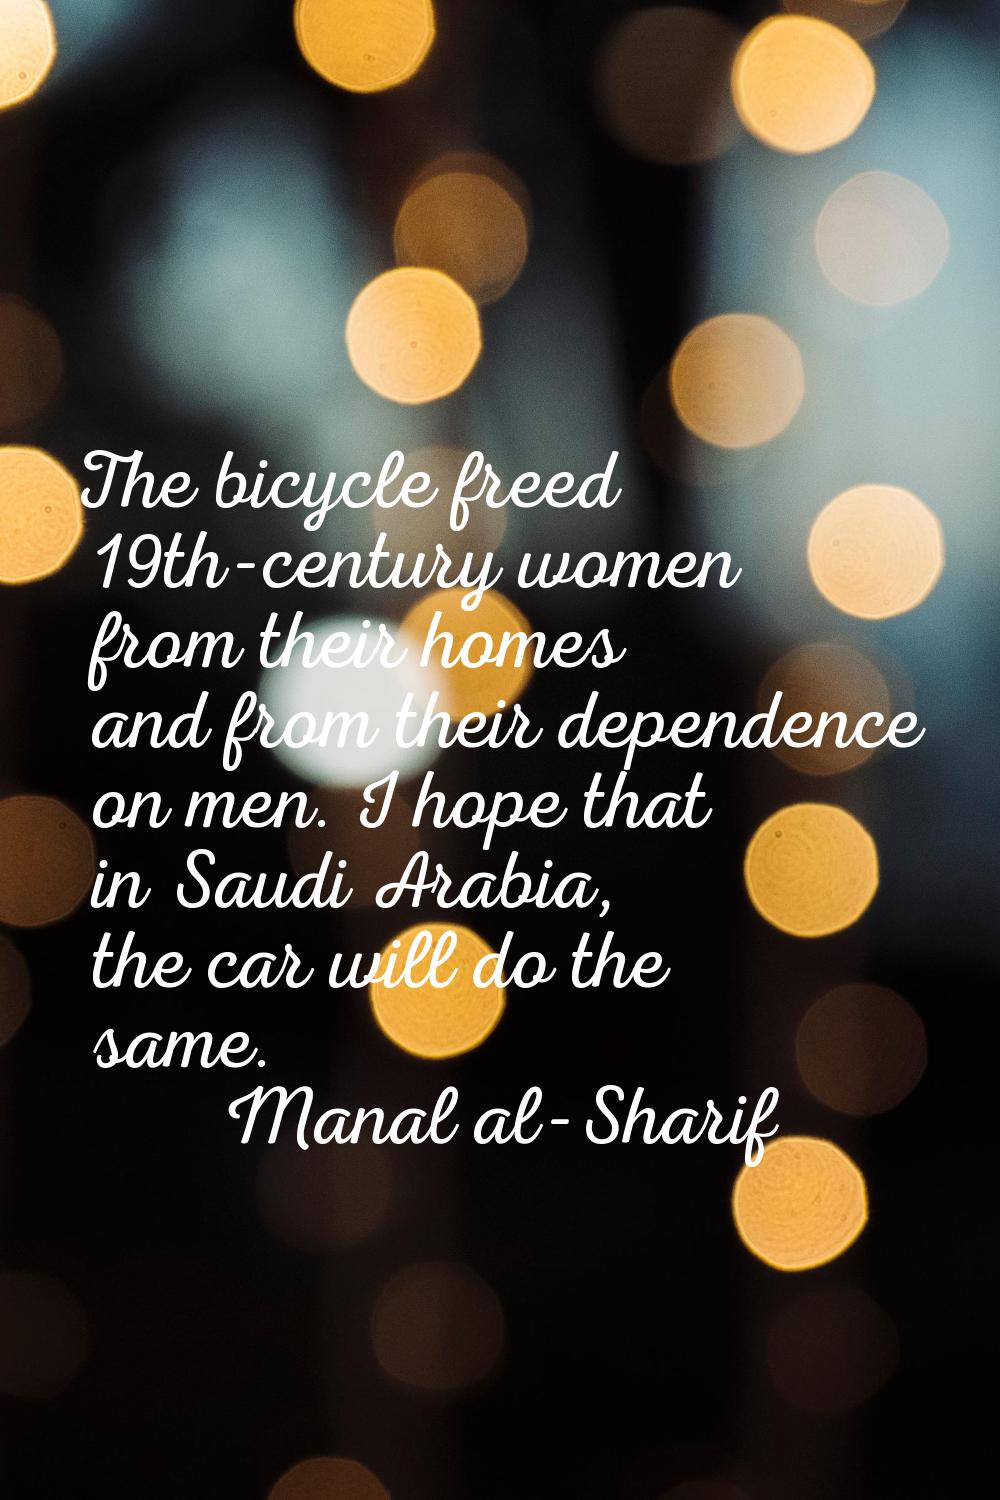 The bicycle freed 19th-century women from their homes and from their dependence on men. I hope that